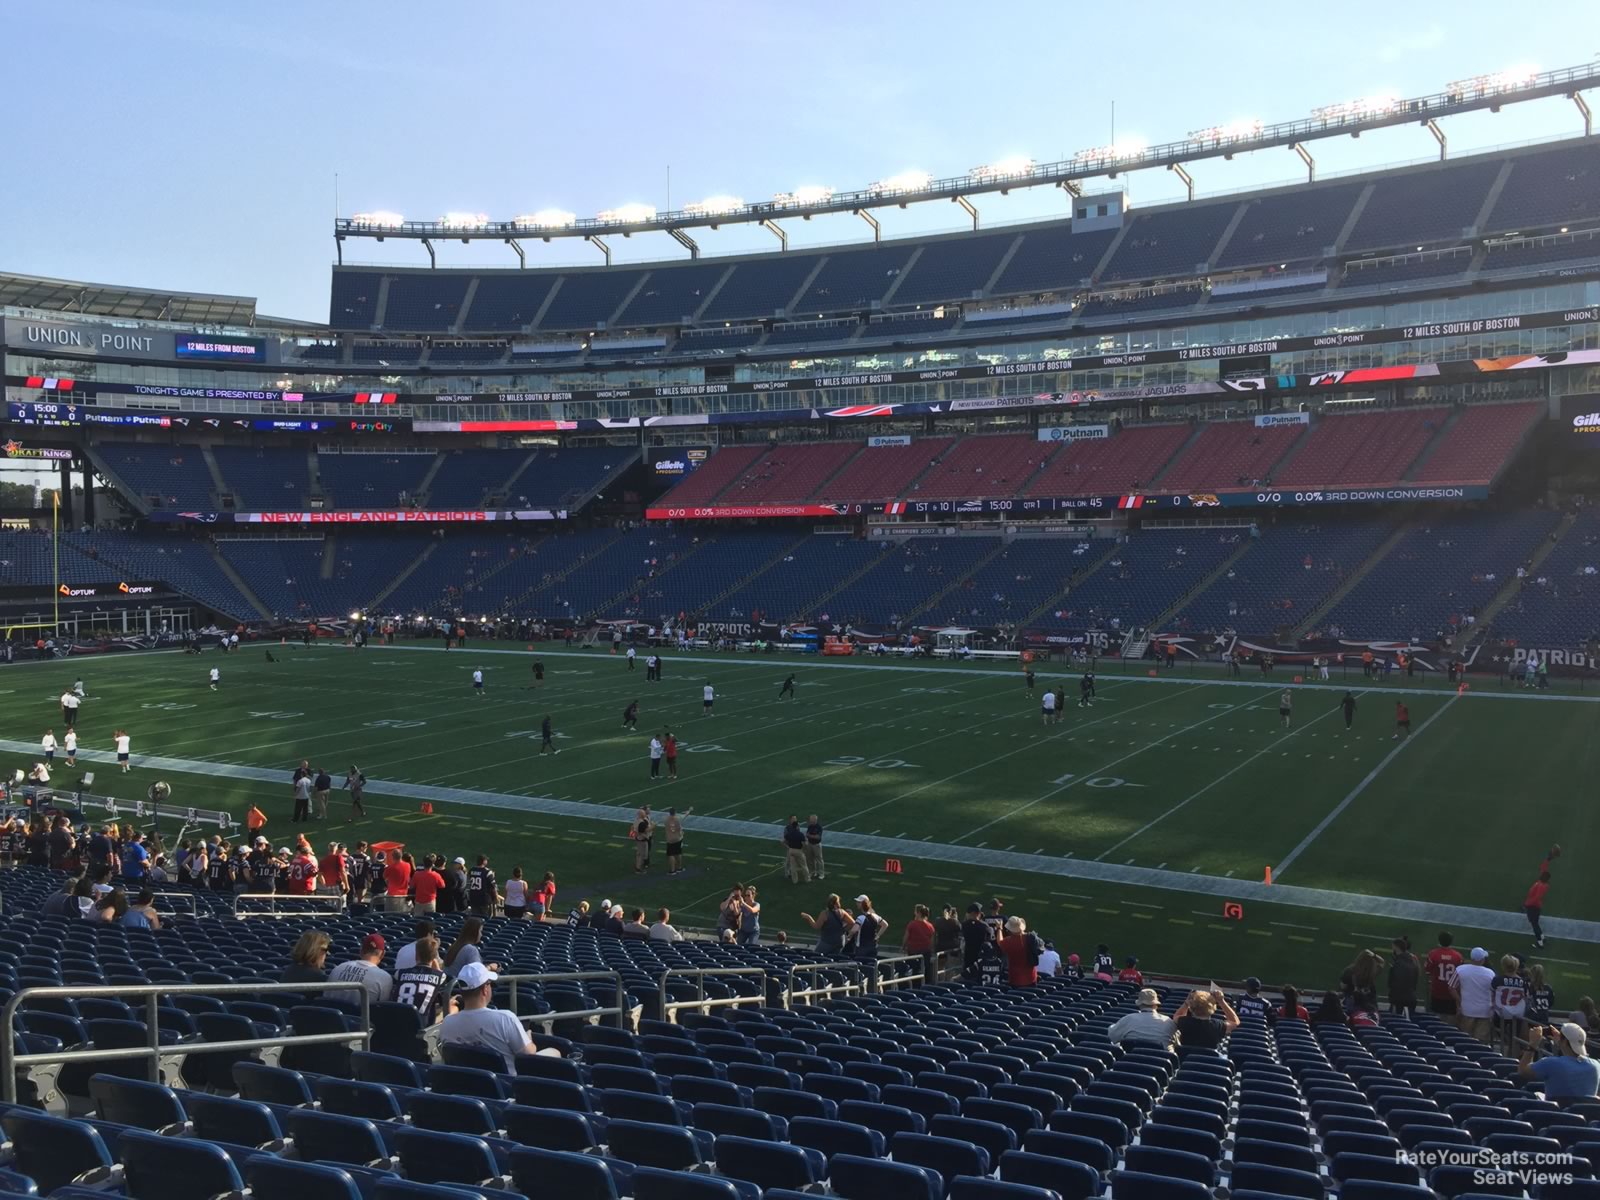 section 105, row 29 seat view  for football - gillette stadium